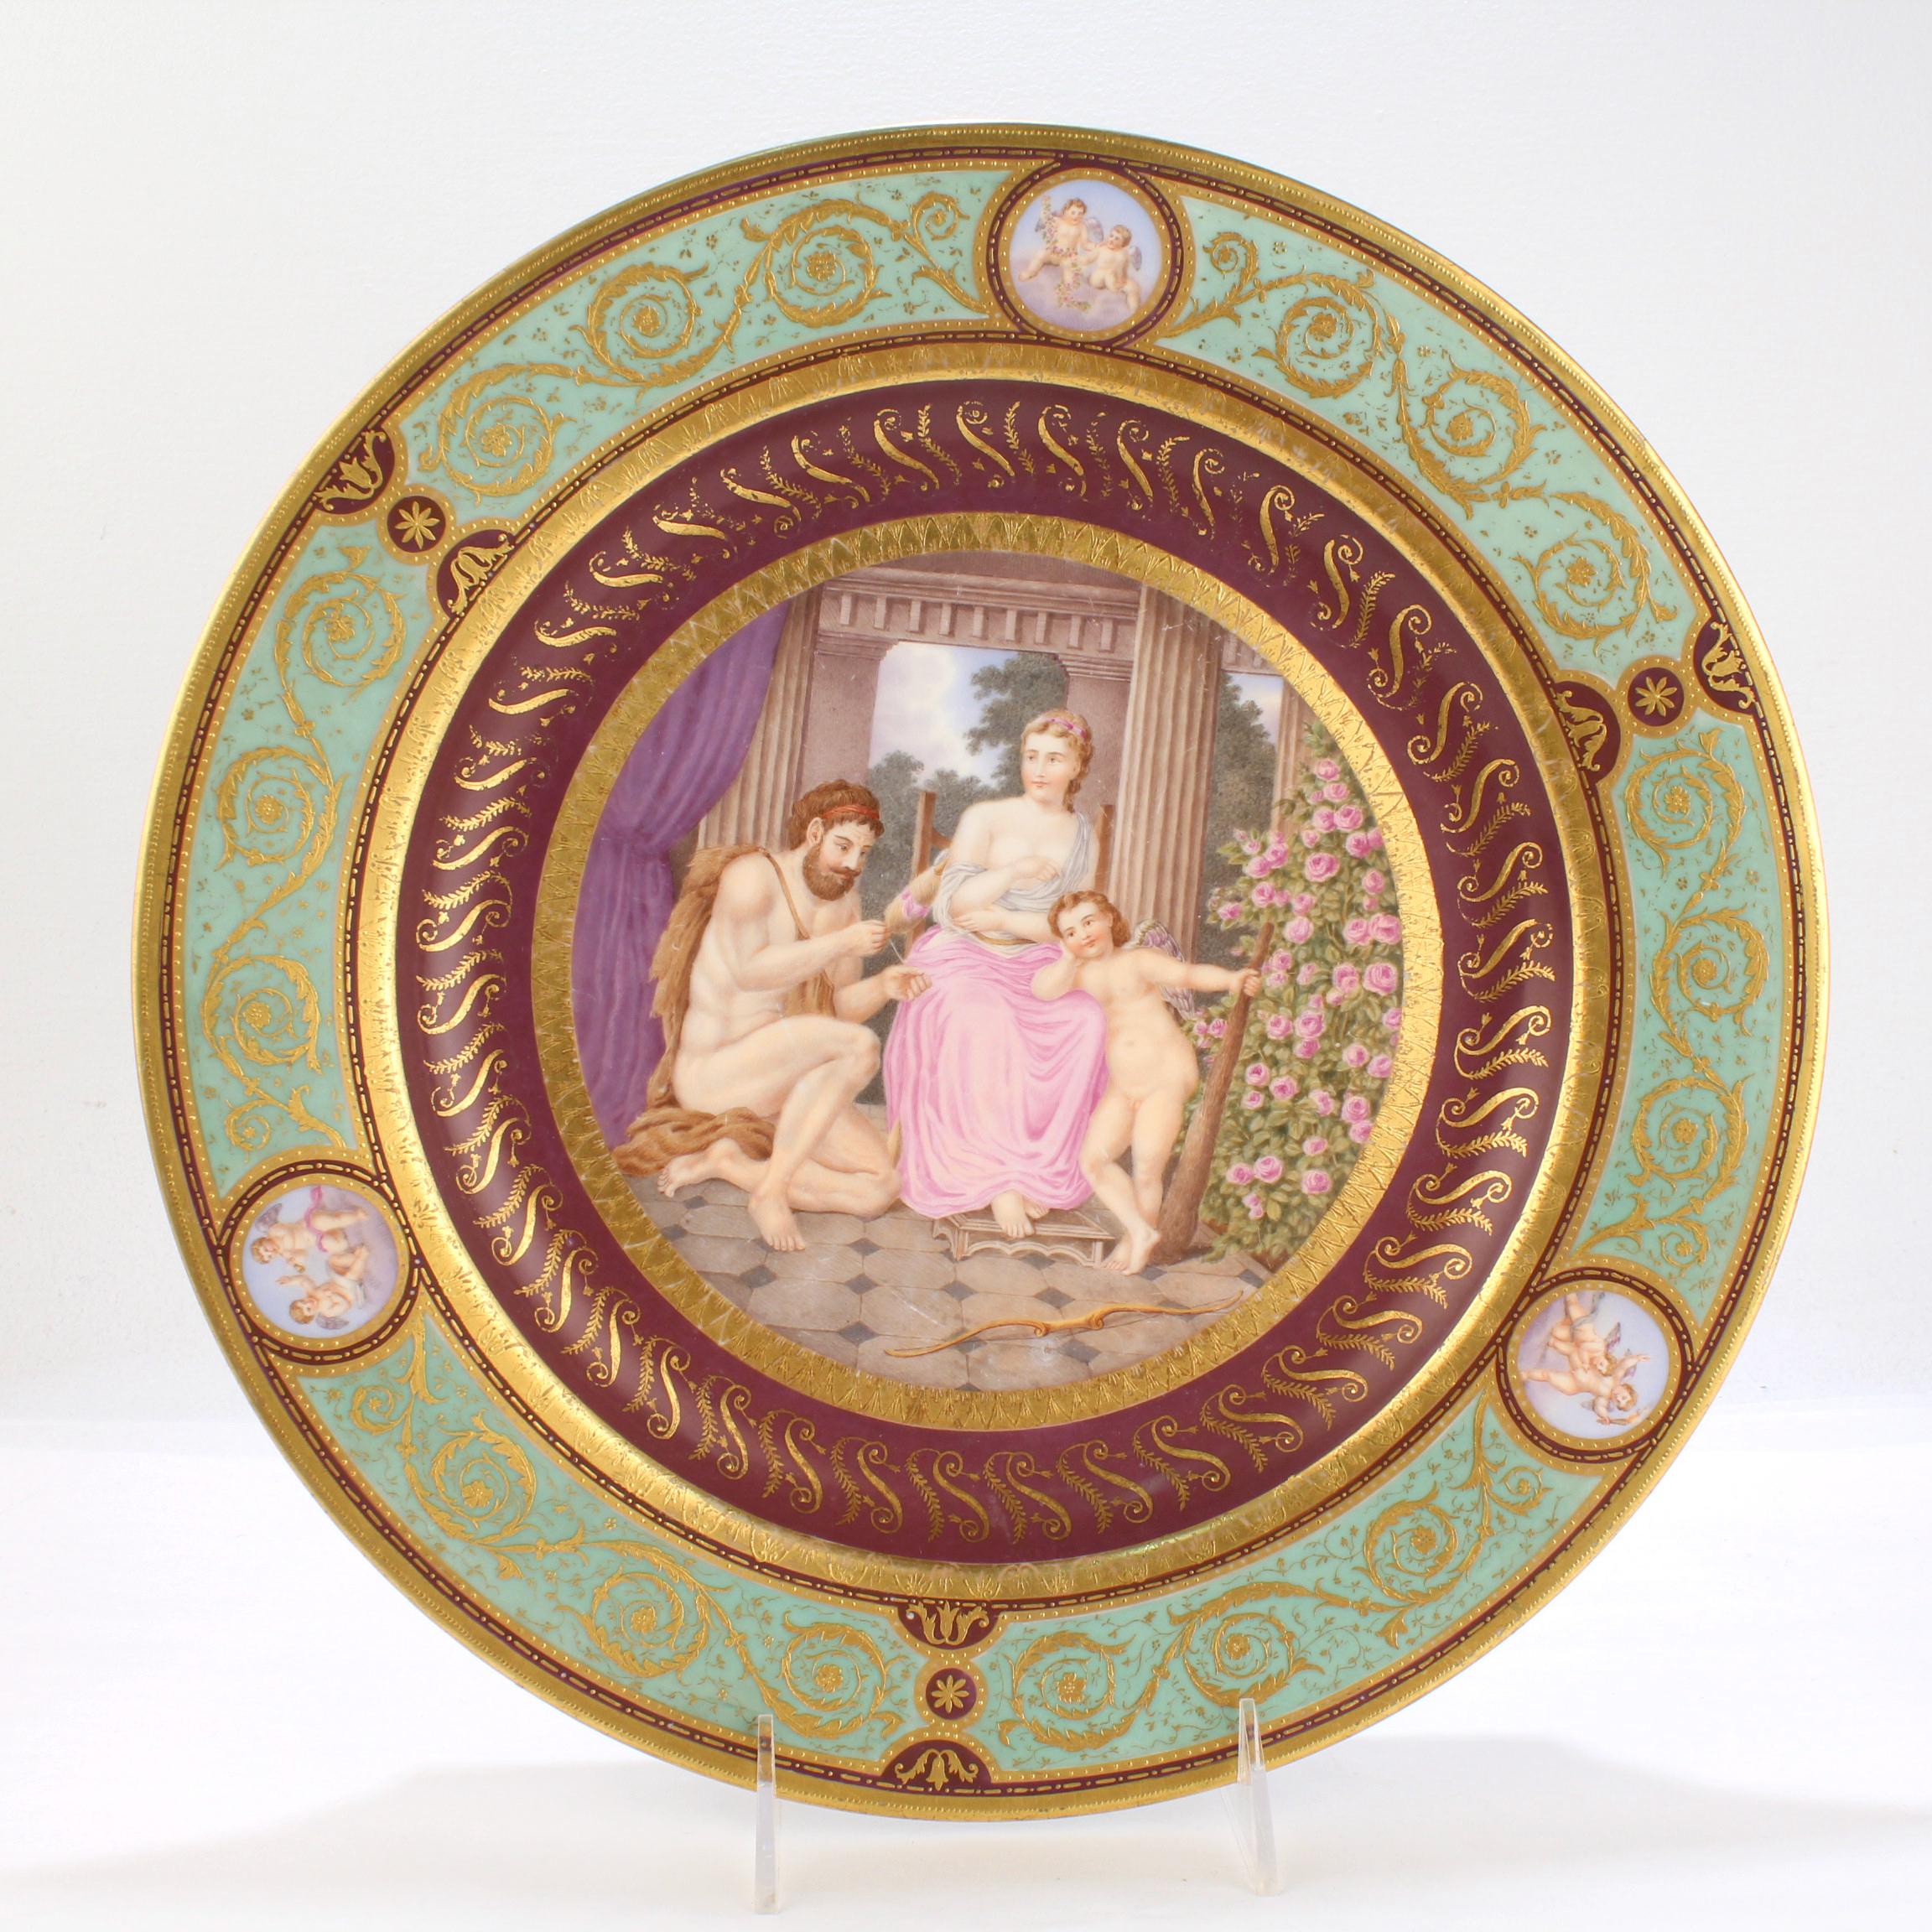 A fine antique Royal Vienna porcelain charger.

Hand painted with a mythological scene including a spinner or weaver, a man with a bear skin cloak, and Cupid. We're not sure of the allegory (but clearly this relates to ancient